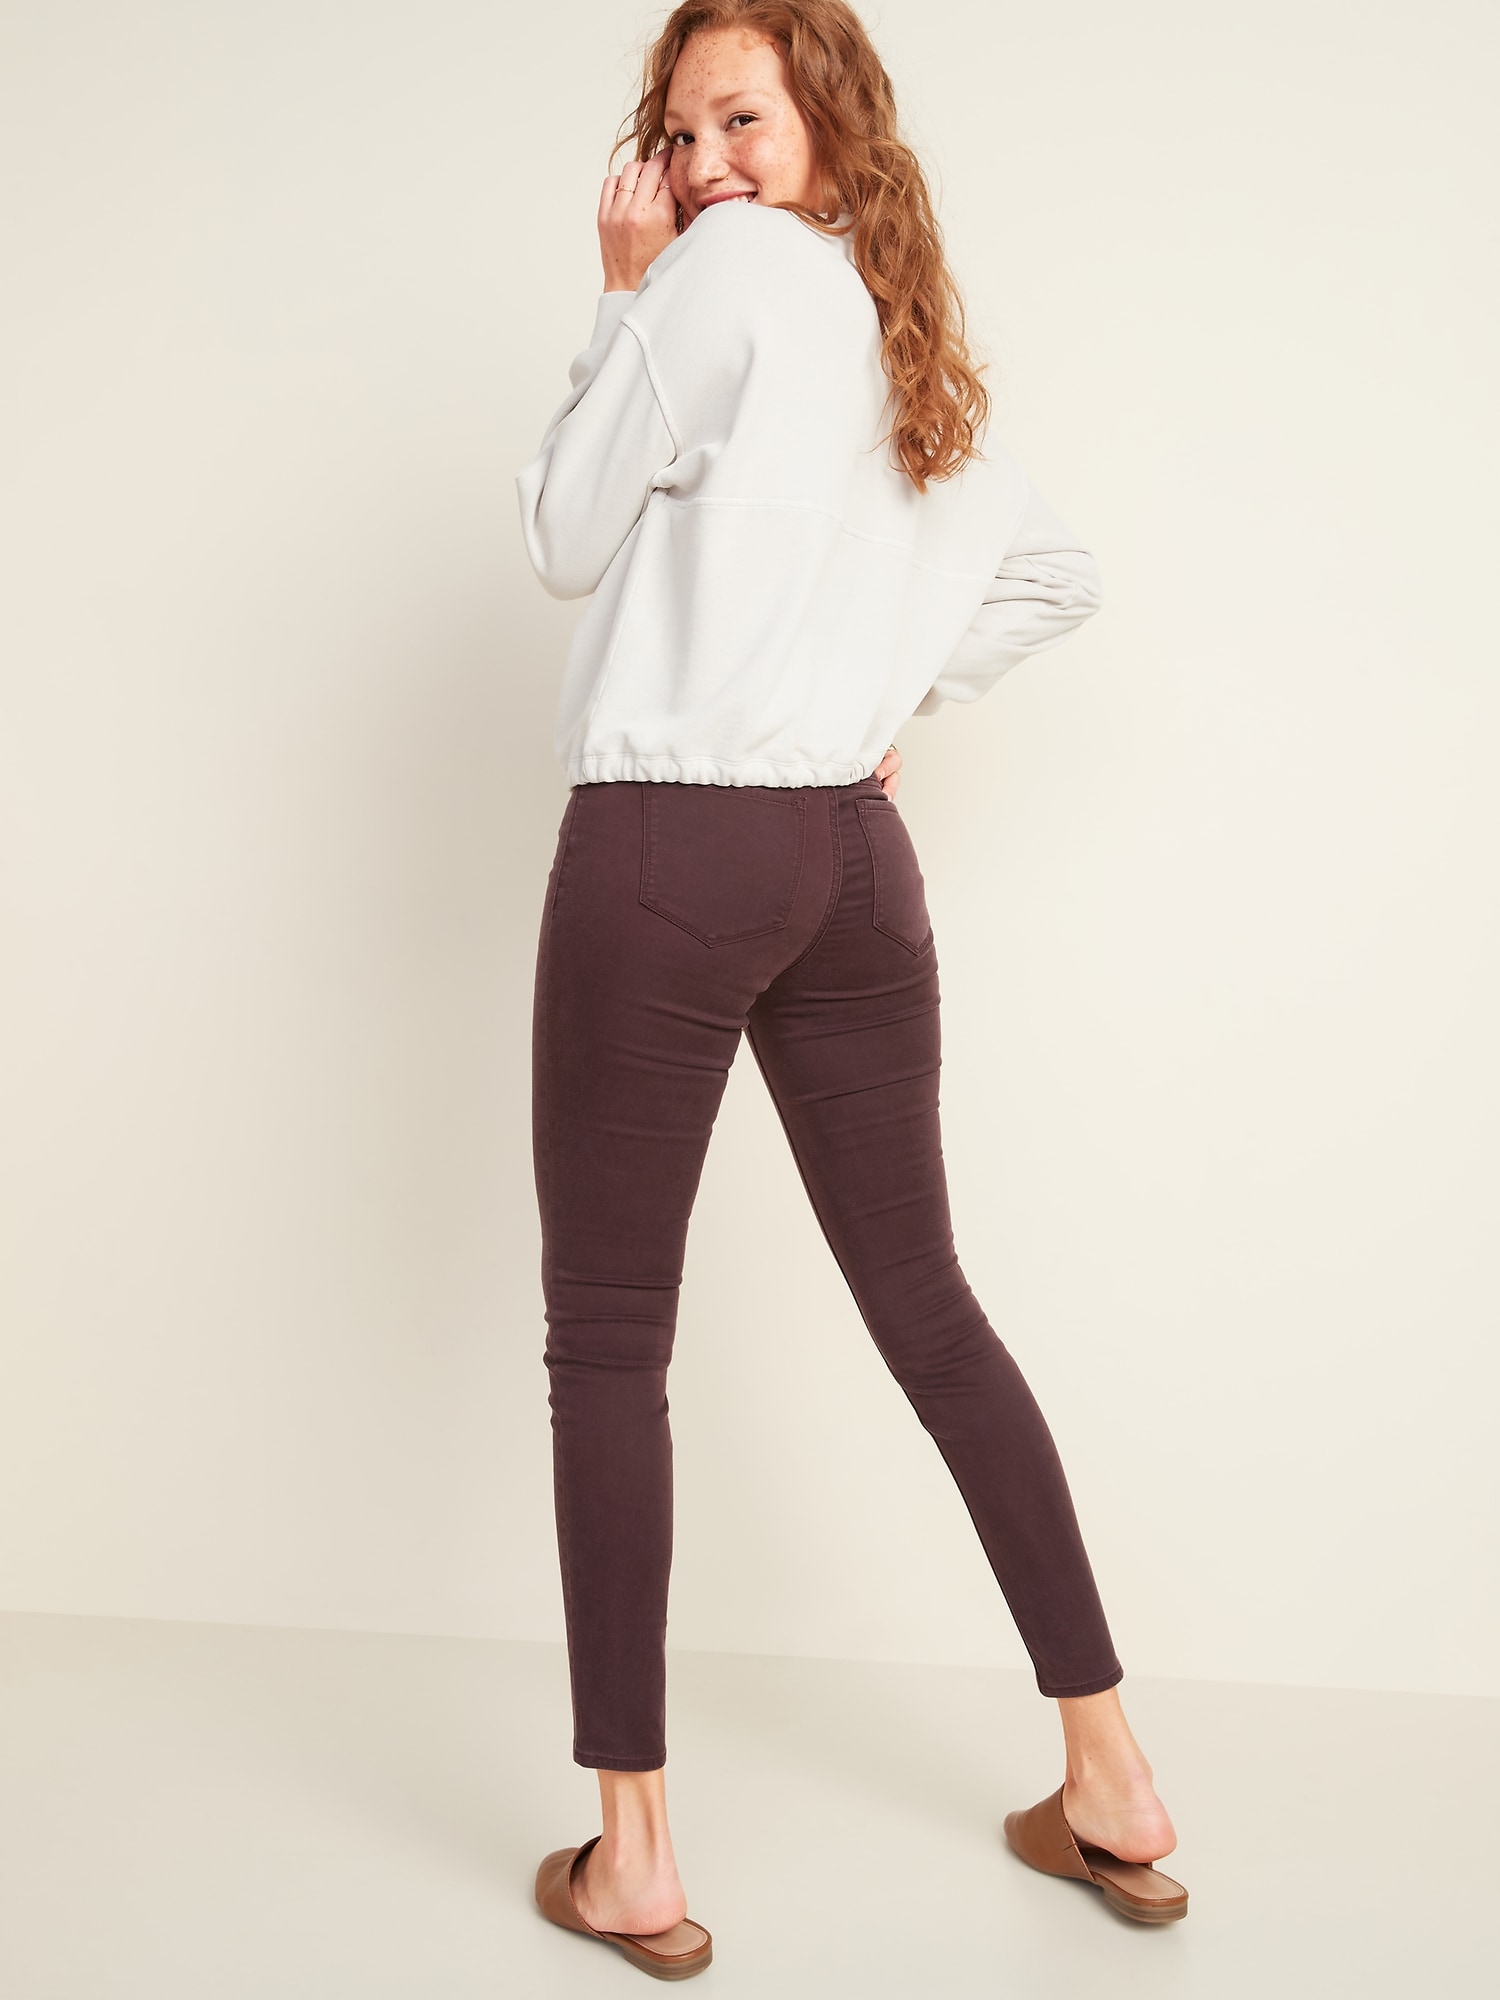 High-Waisted Rockstar Super Skinny Sateen Jeans for Women | Old Navy